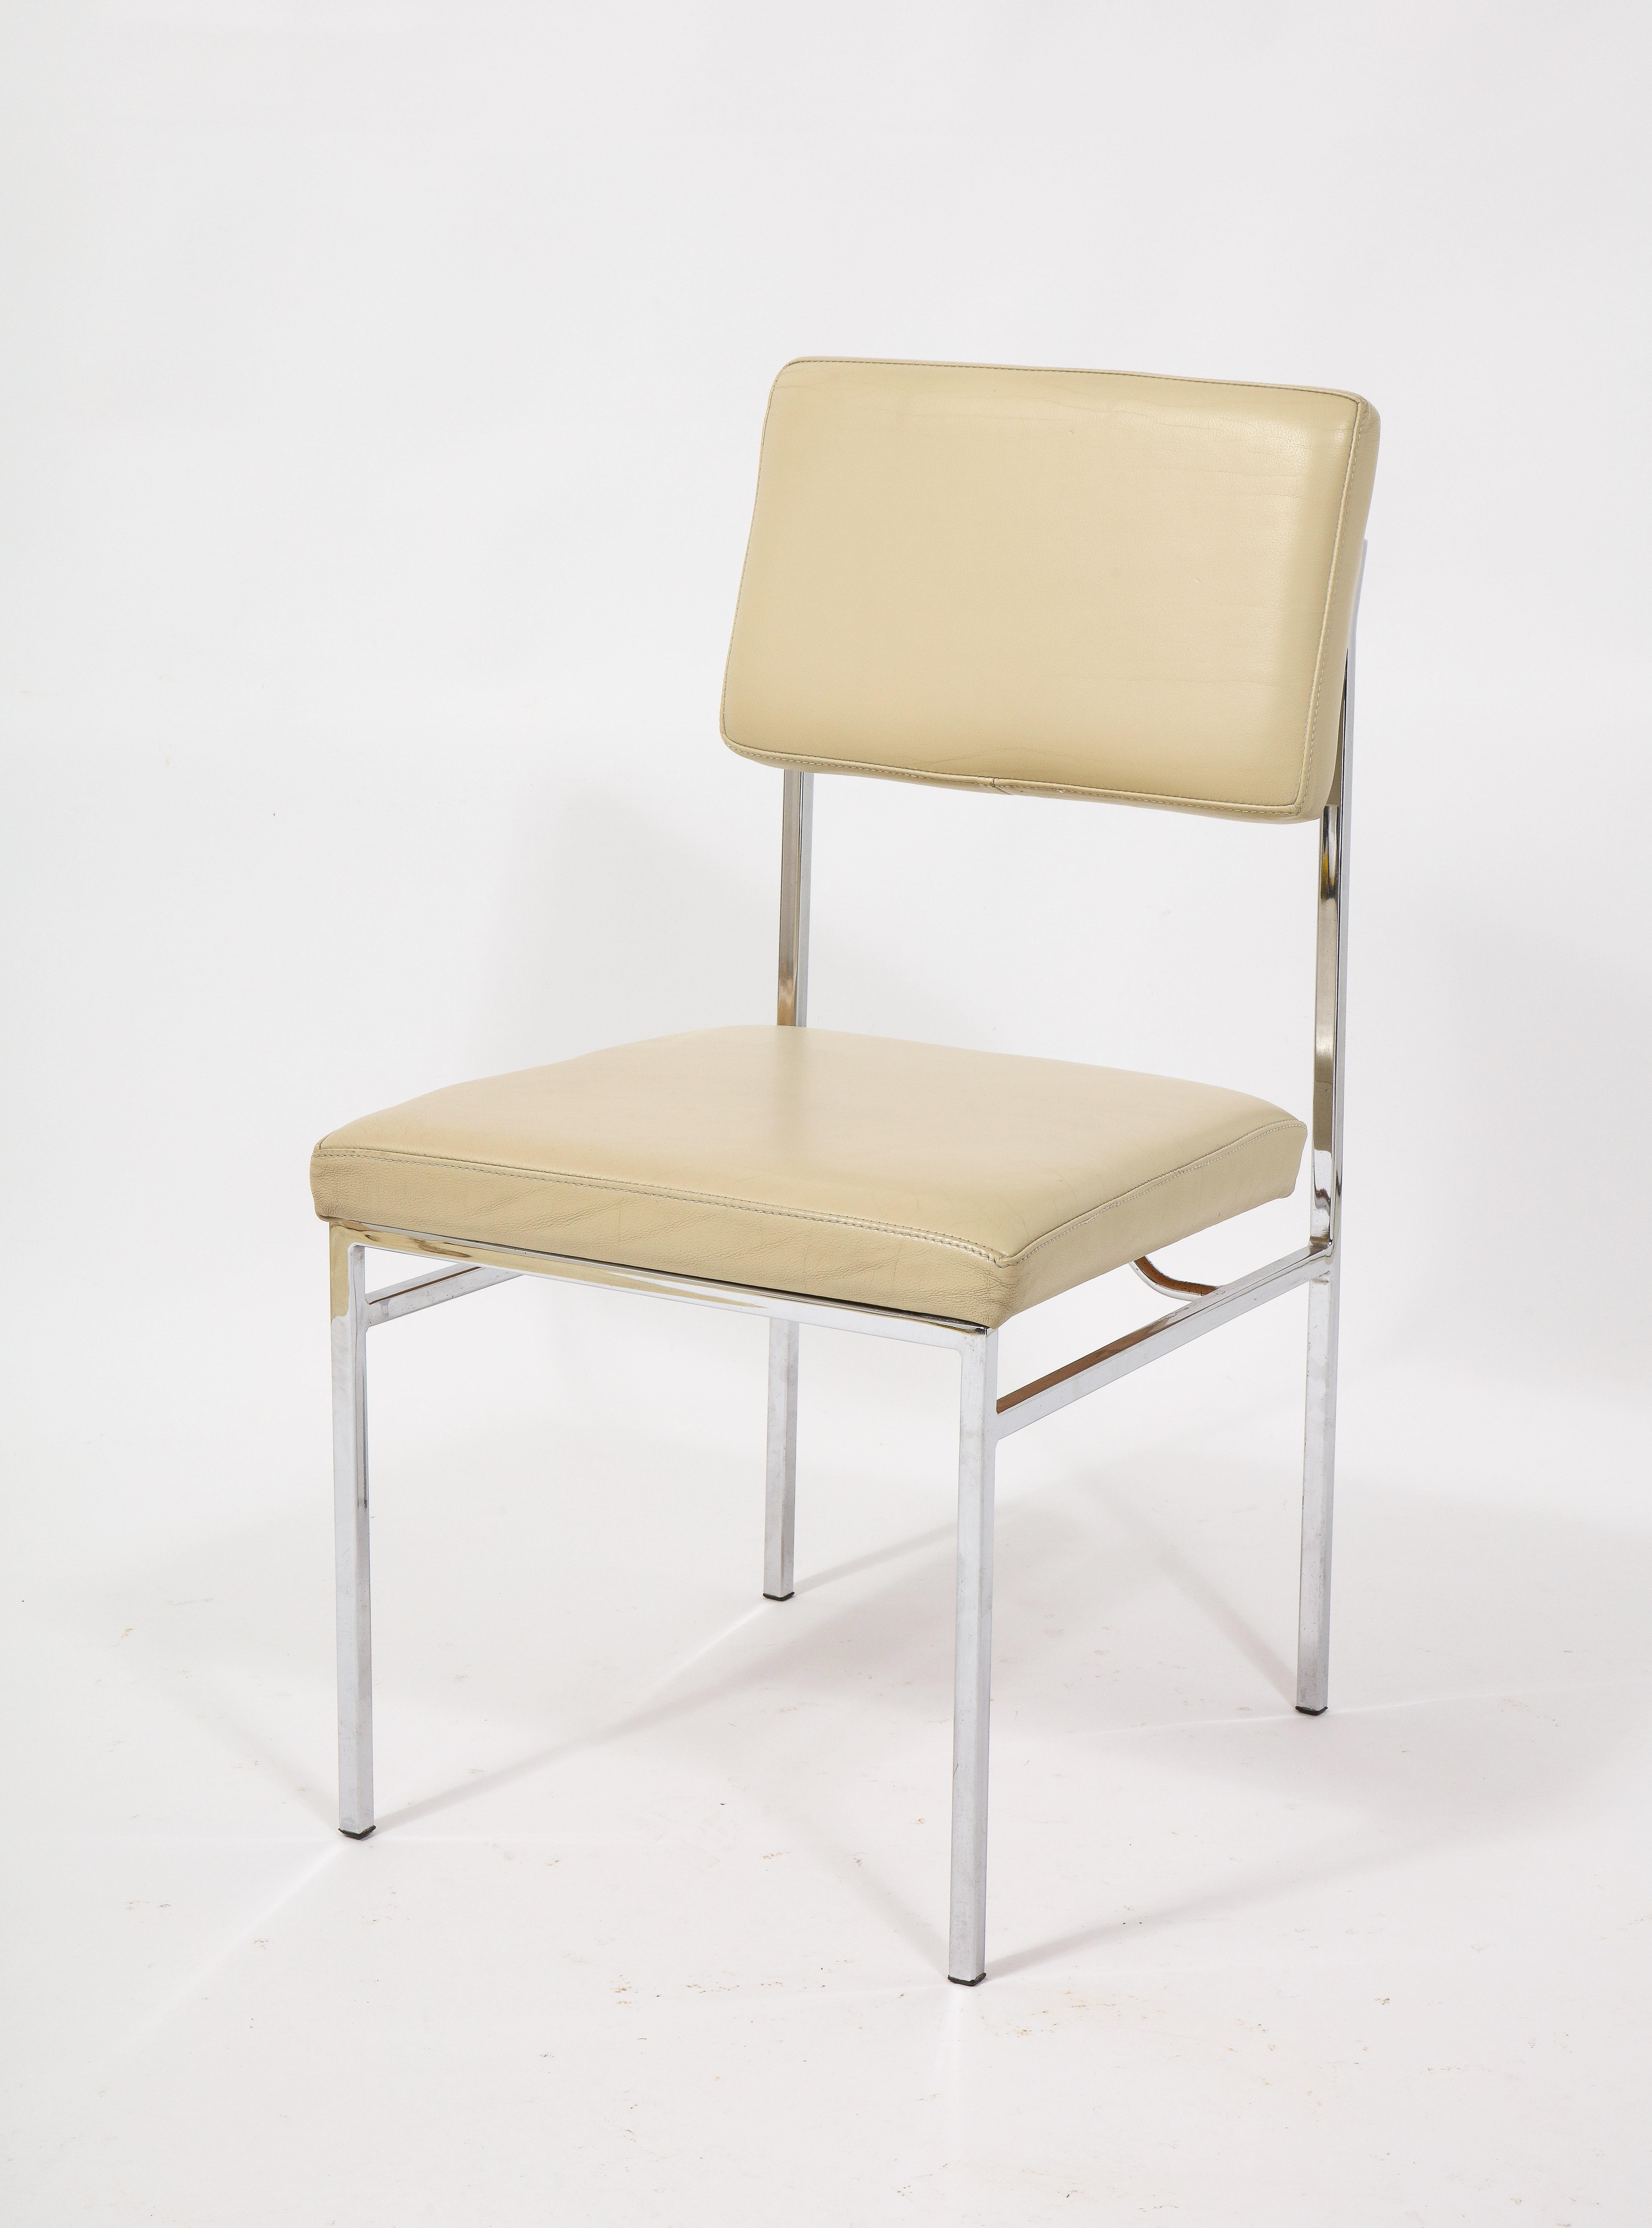 Mid-20th Century 6 Chrome and Cream Leather P60 Chairs by Philippon & Lecoq, France, 1960's For Sale